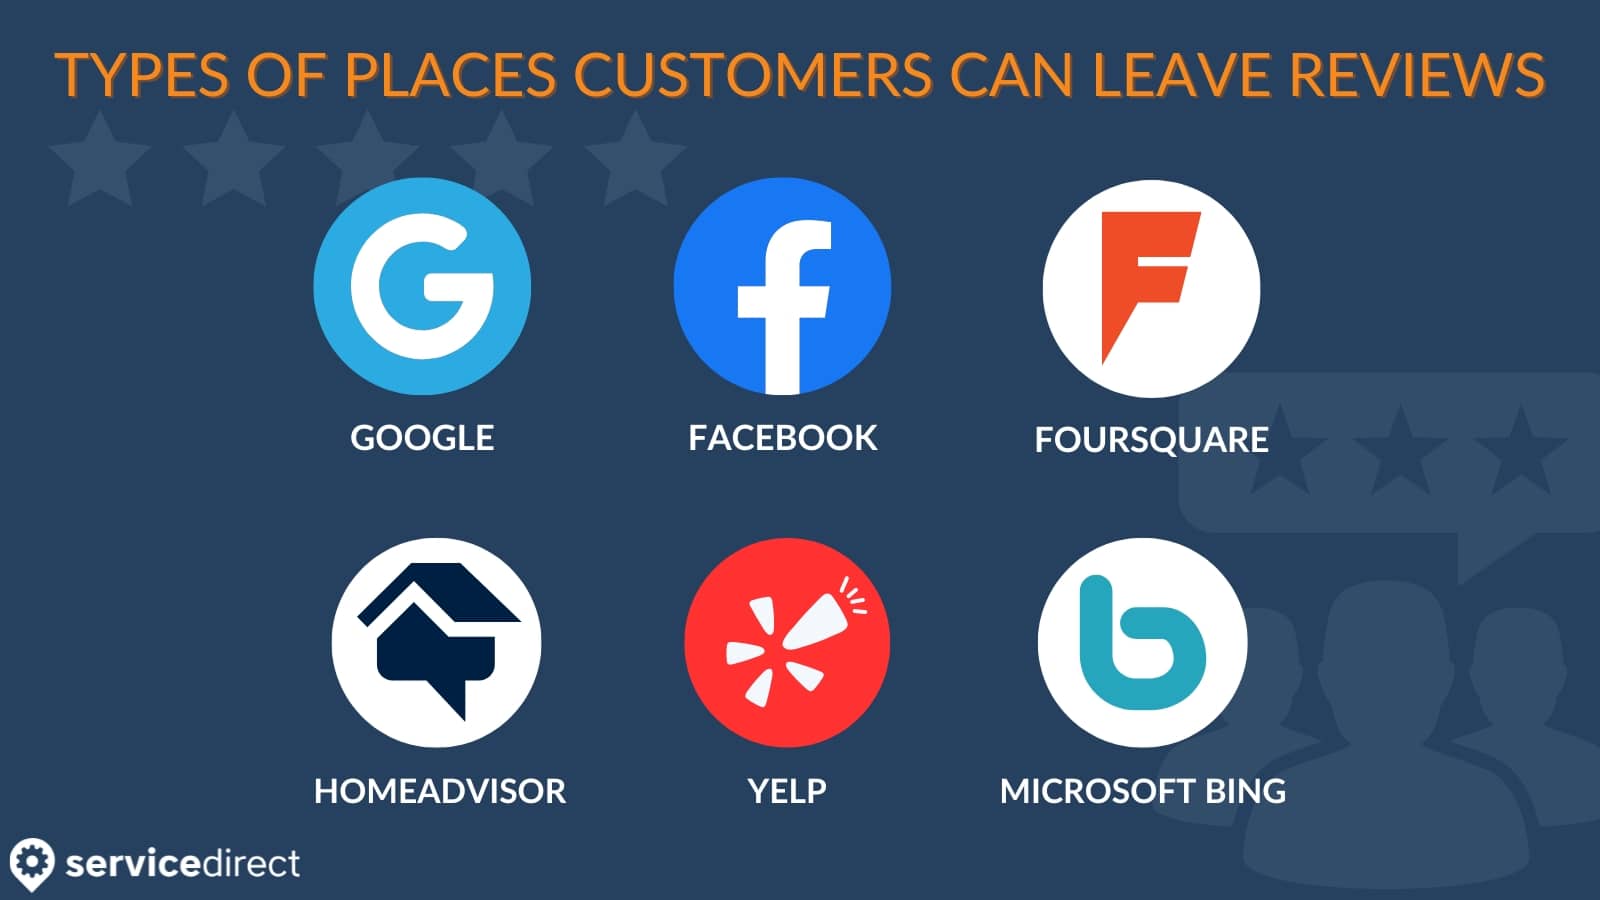 Types of Places Customers Can Leave Reviews